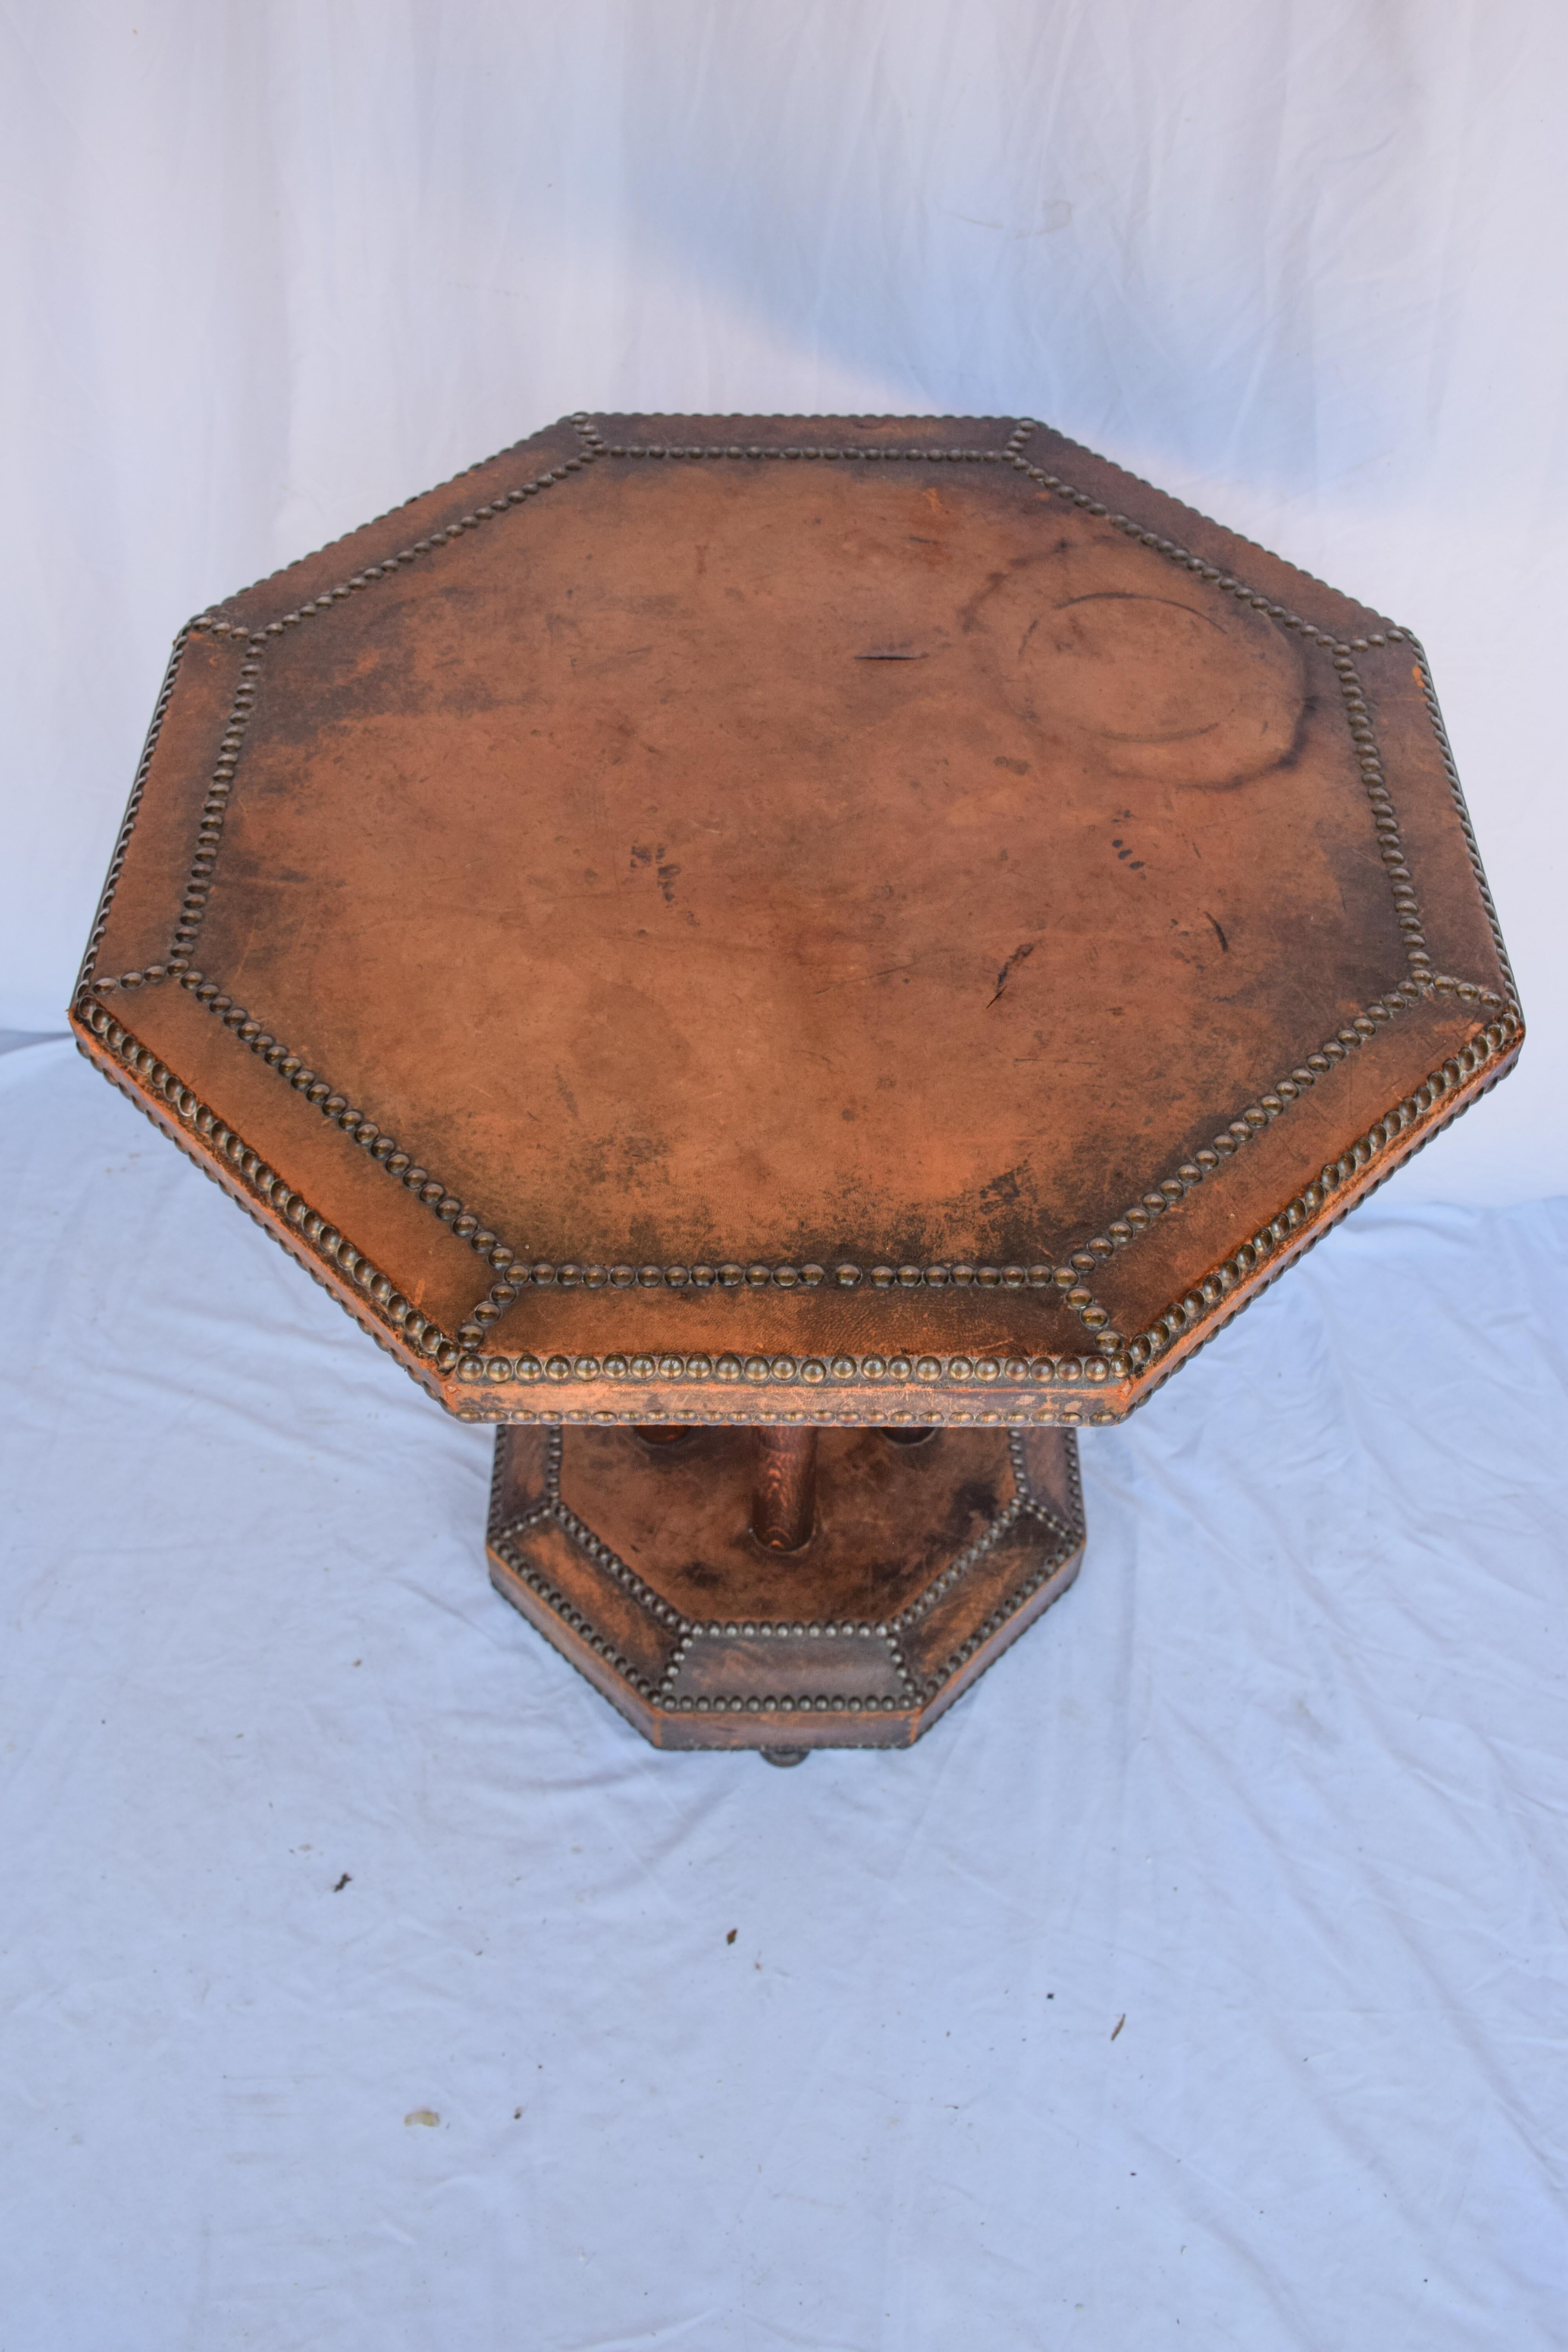 French Art Deco distressed leather side bistro table.
Unique shape antique octagonal wood table with leather wrapped top with studded detail also covered in a studded leather.
Great antique patina, the leather is well used but still in good